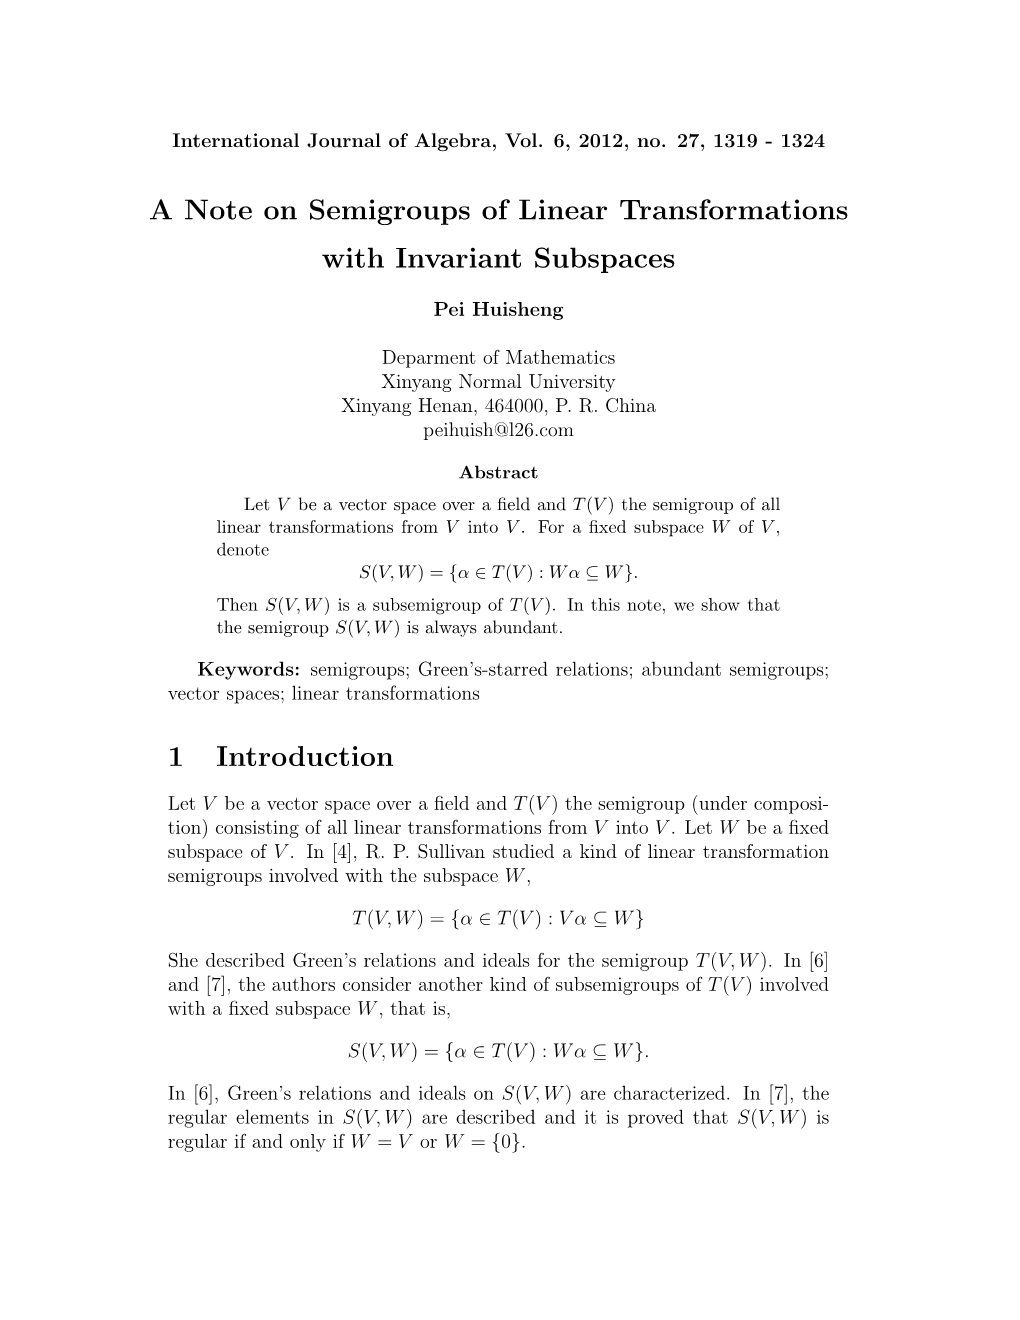 A Note on Semigroups of Linear Transformations with Invariant Subspaces